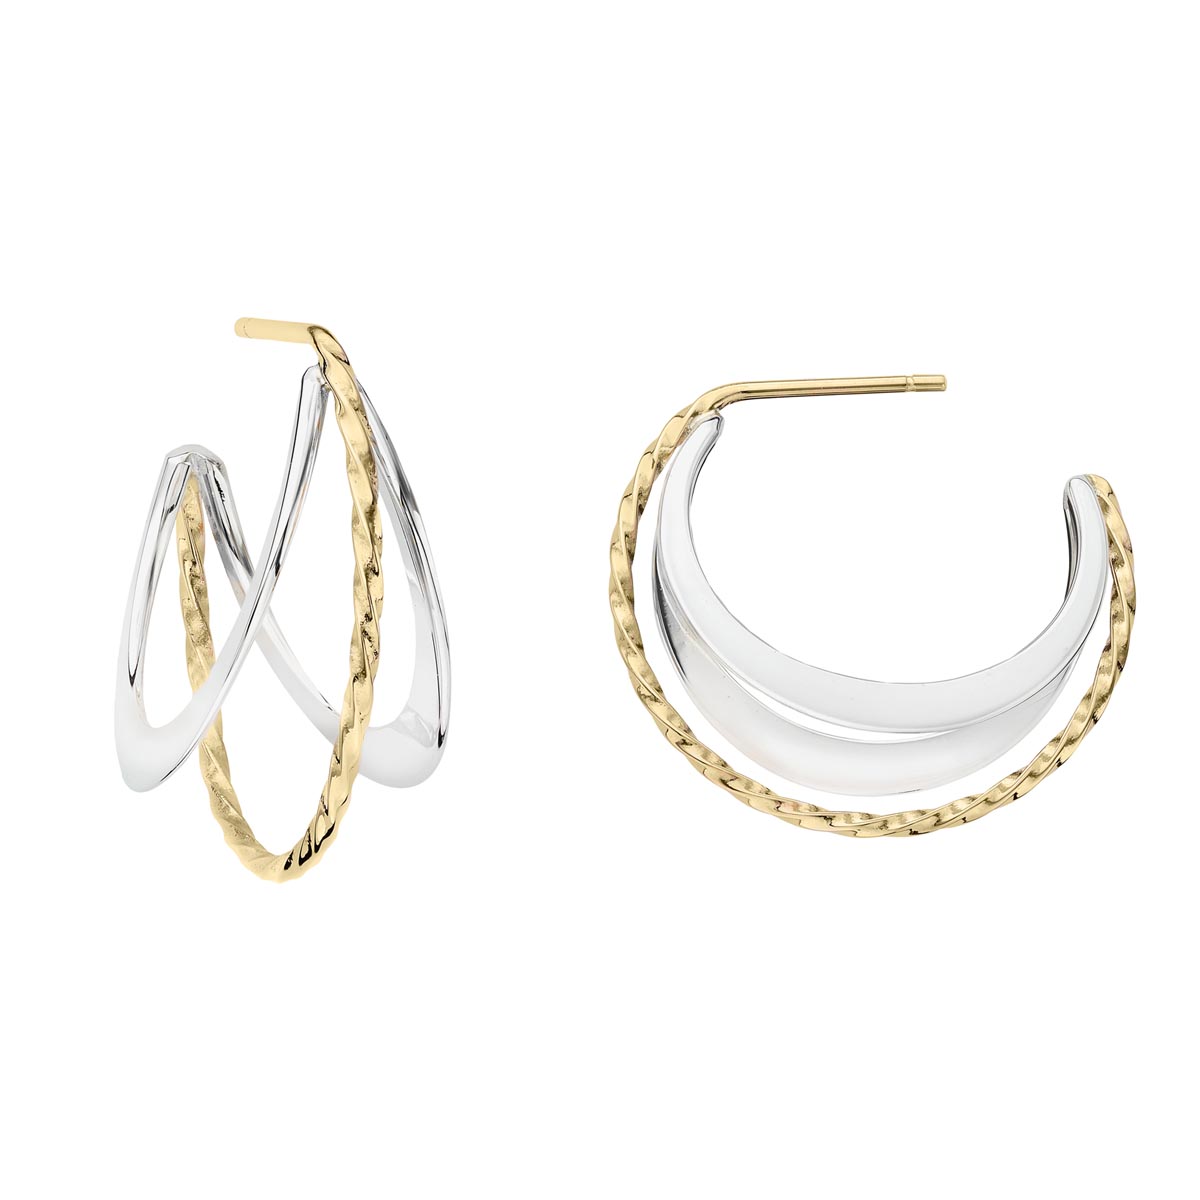 E.L. Designs Twizzler Hoop Earrings in Sterling Silver and 14kt Yellow Gold